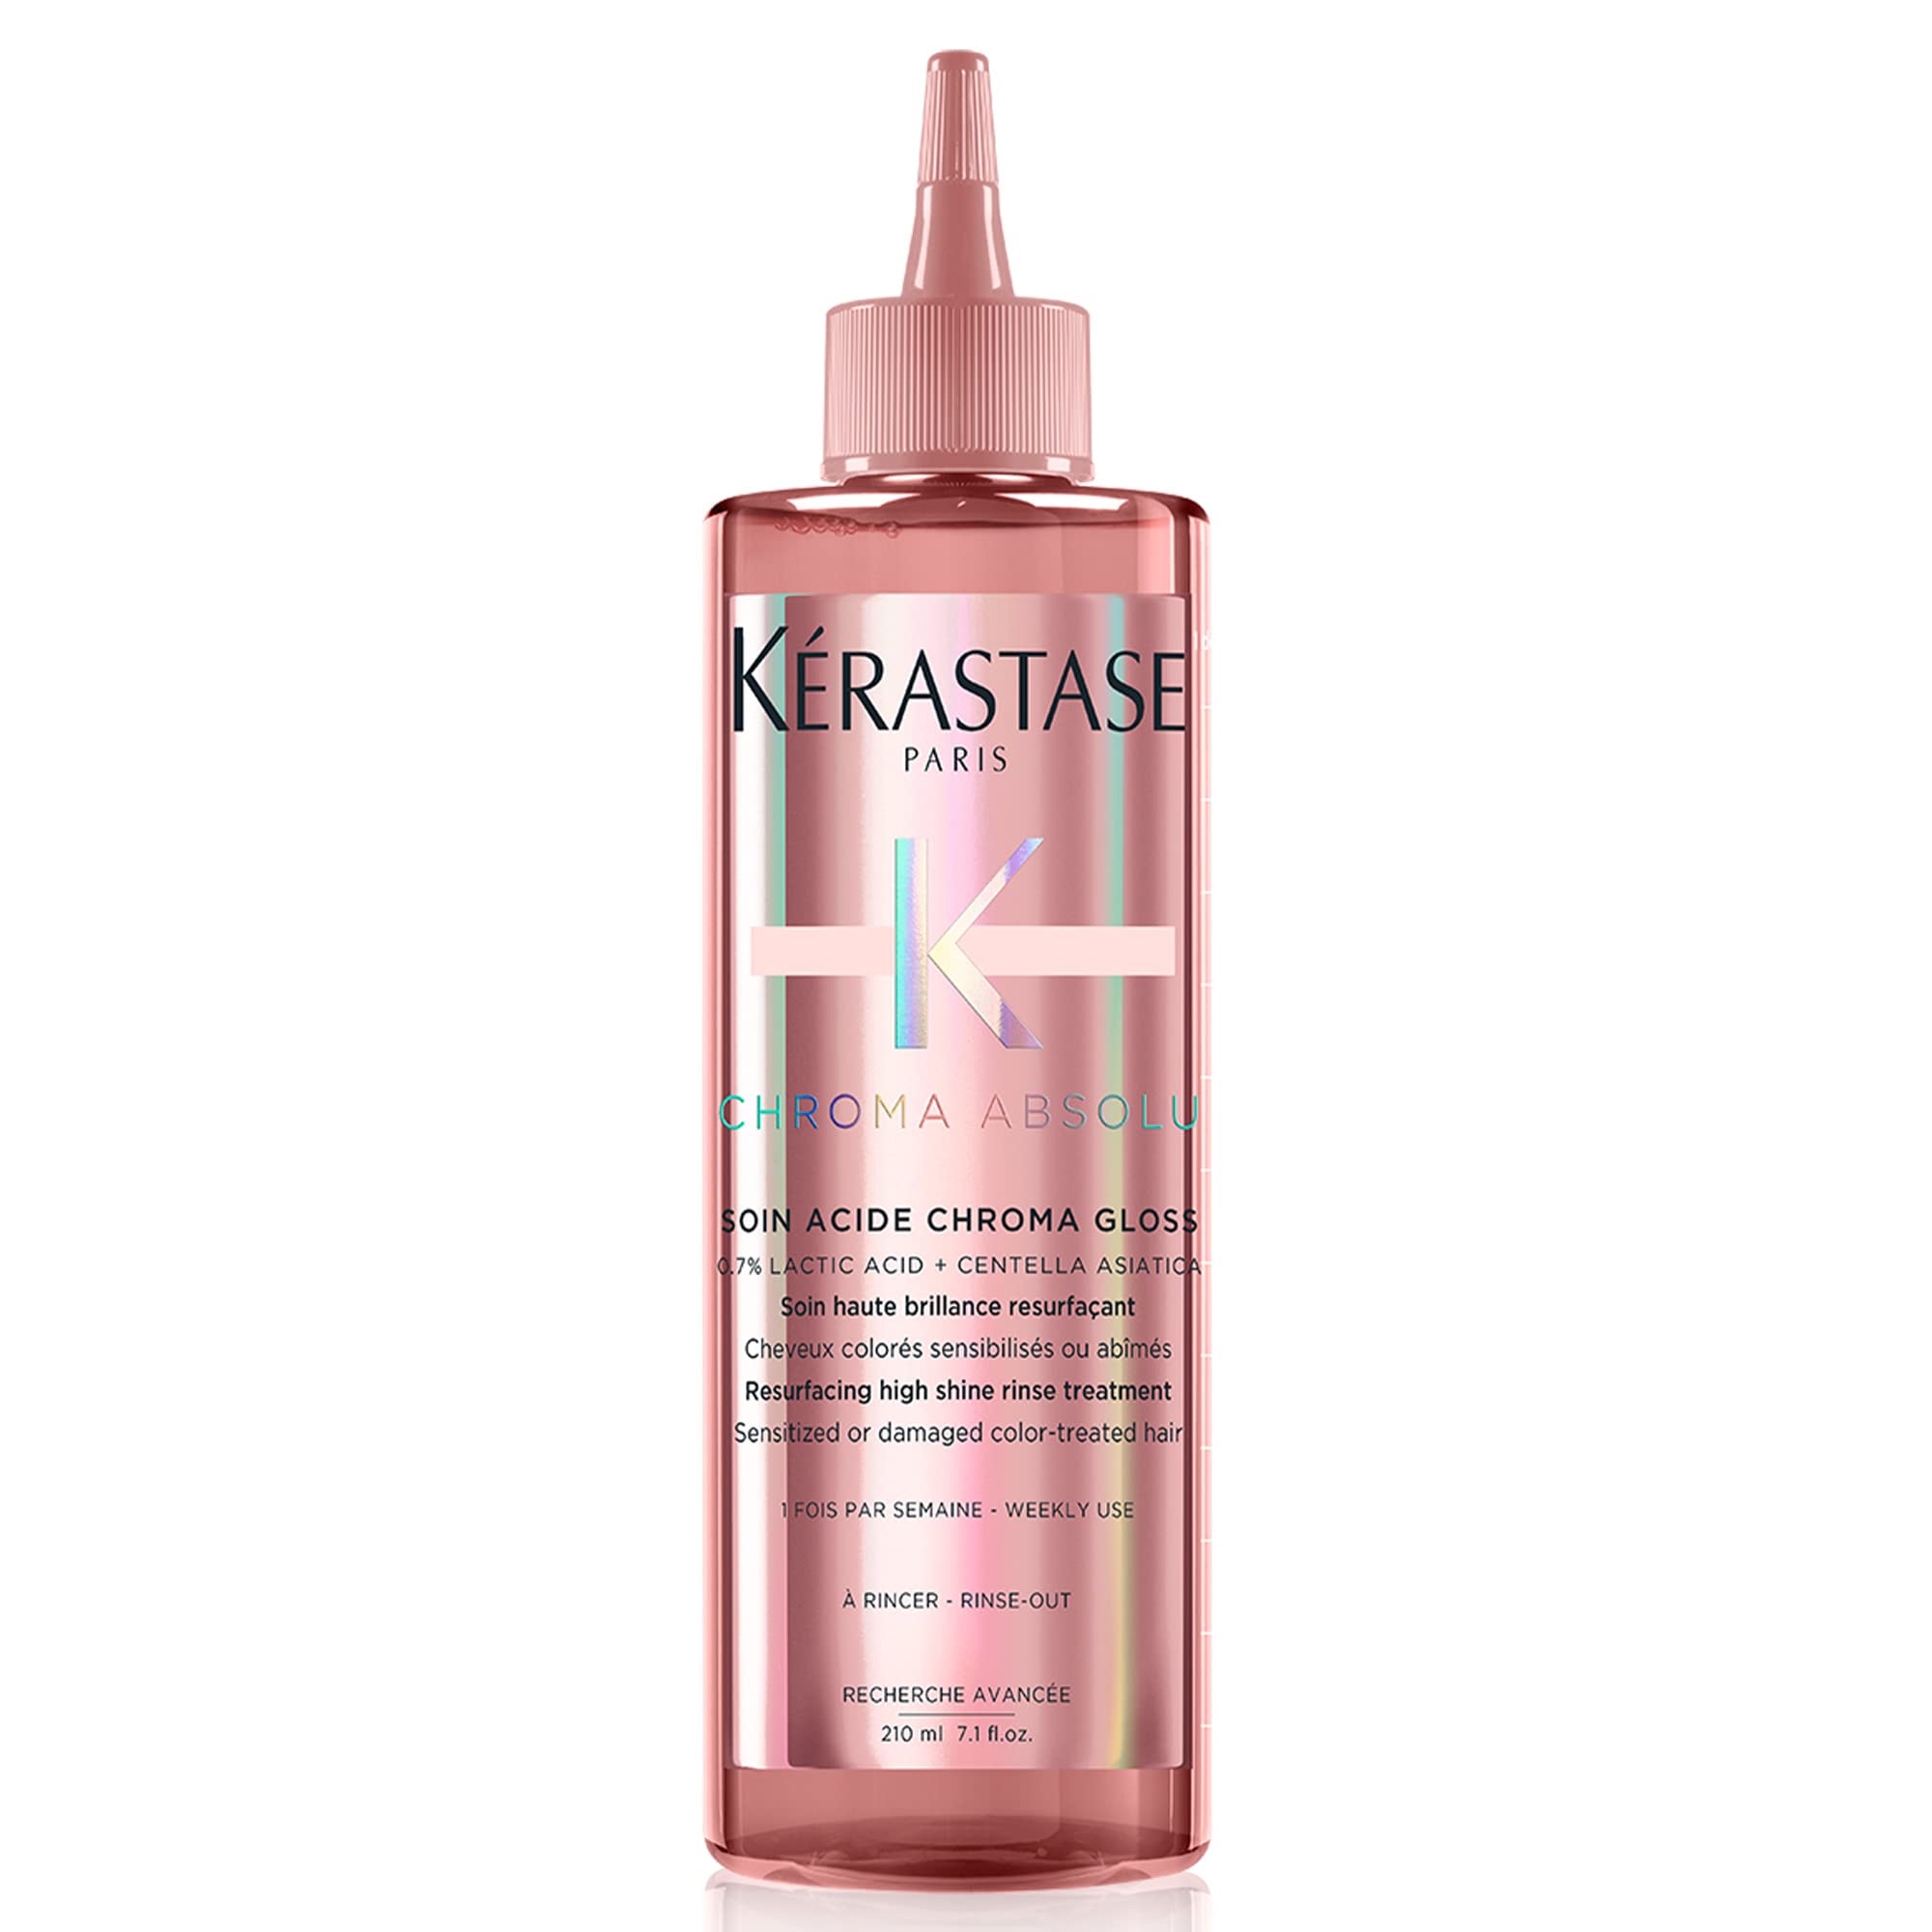 KERASTASE Chroma Absolu Chroma Hair Gloss | High Shine Treatment for Damaged Color-Treated Hair | Strengthens and Adds Shine | Lightweight Formula with Lactic Acid | Soin Acide | 7.1 Fl Oz